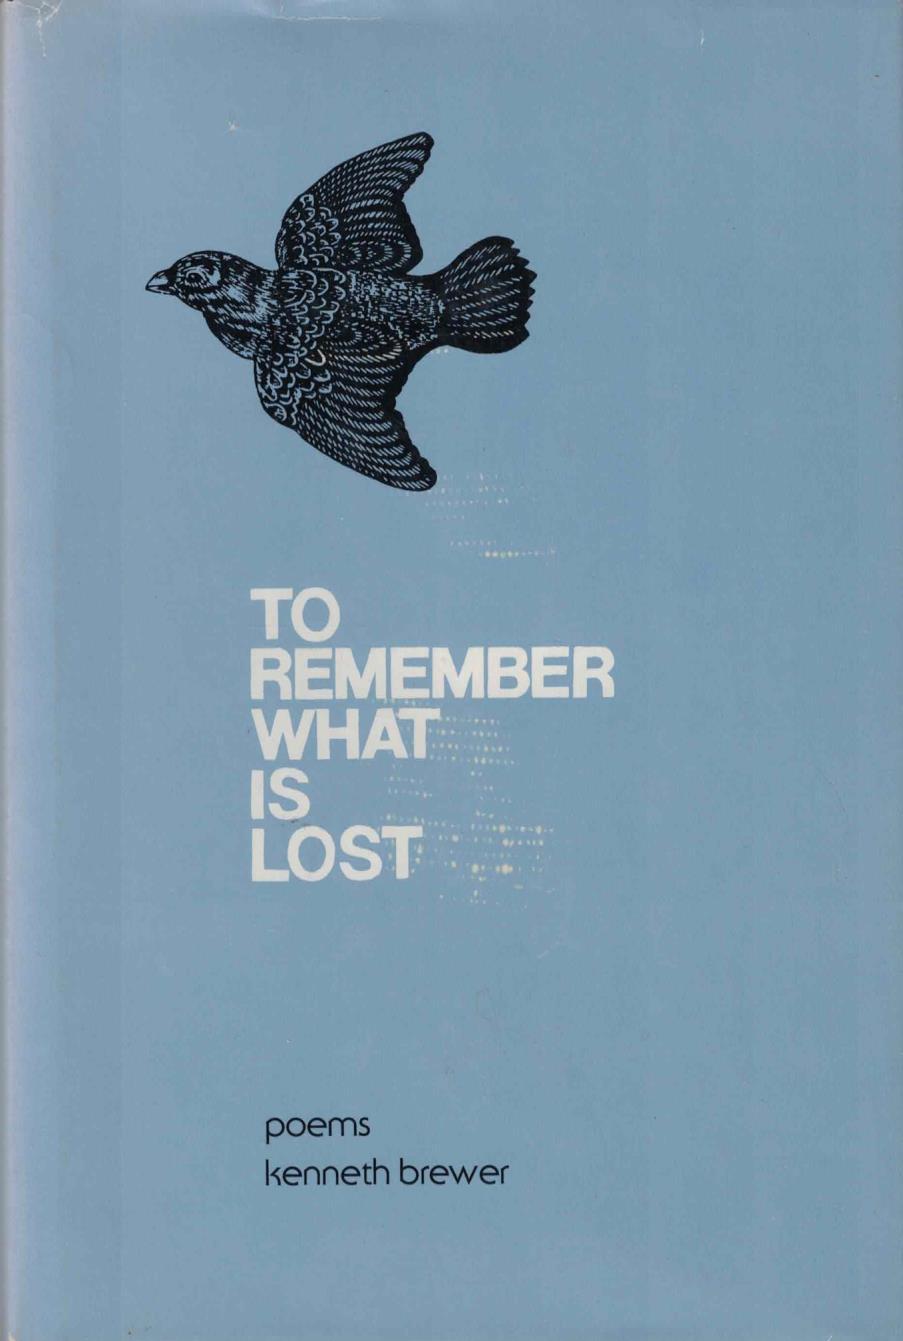 2) Kenneth W. Brewer. To Remember What is Lost Logan, UT: Utah State University Press, 1982. 82/500. 55pp. Octavo. Blue cloth. Fine/Very good. Light bumping to head of jacket.